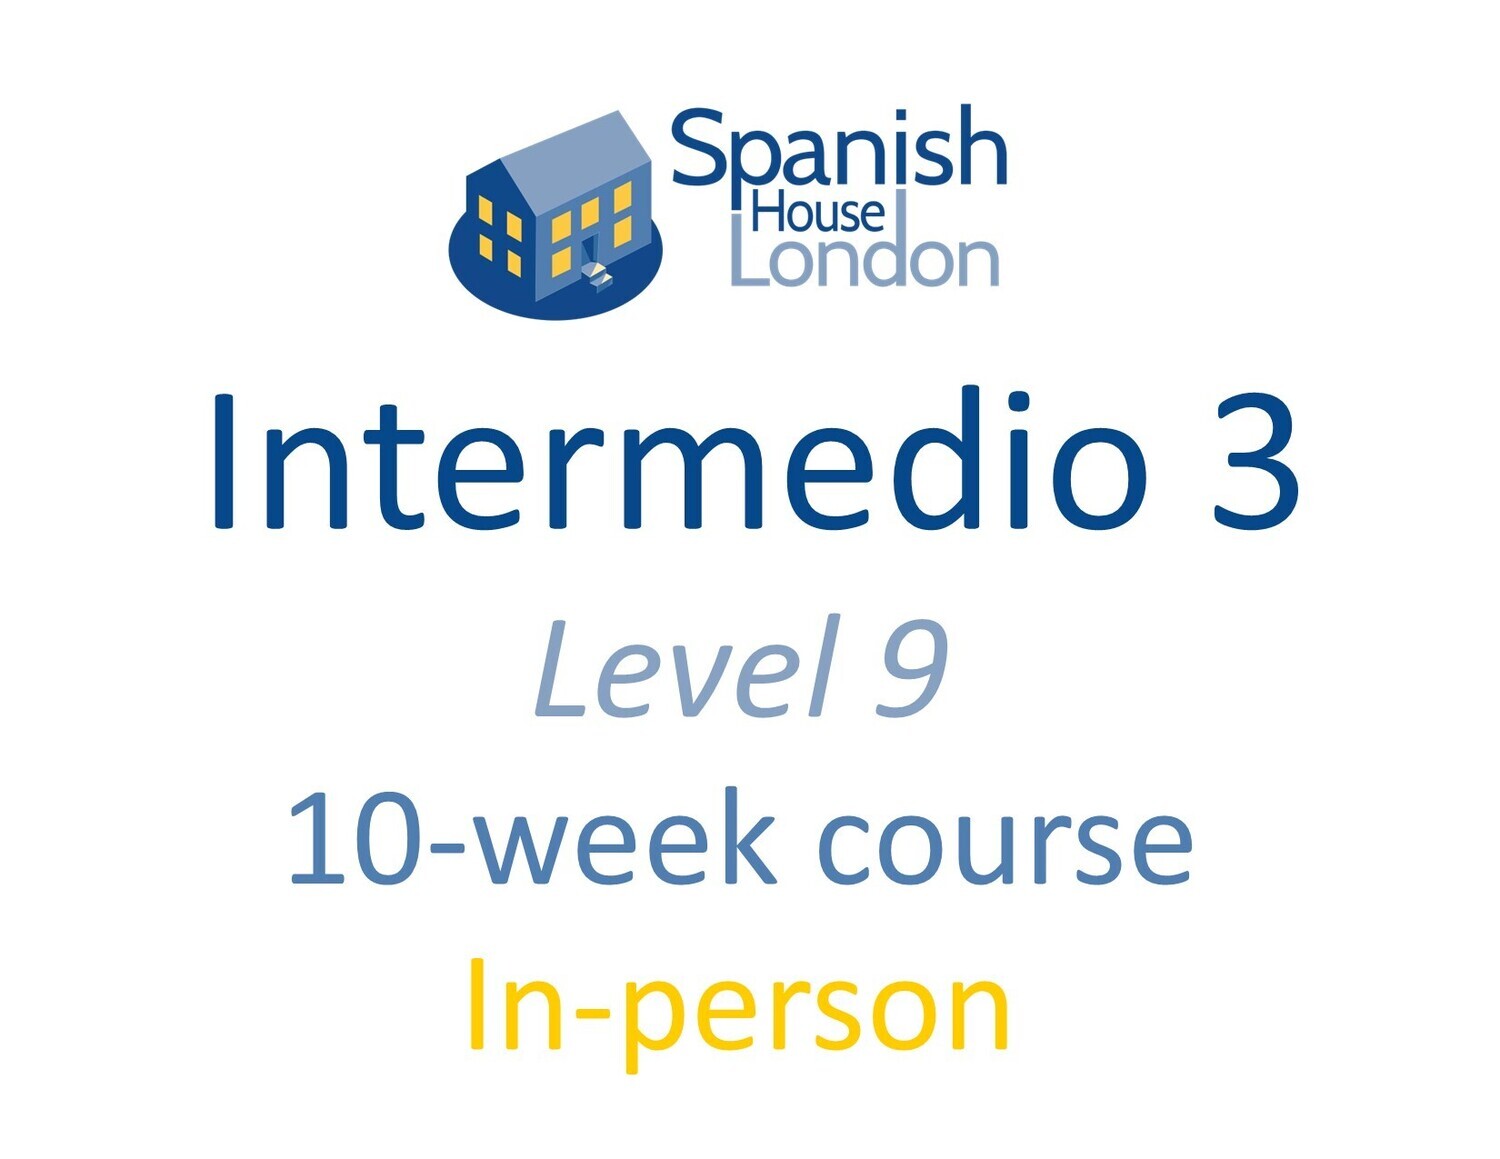 Intermedio 3 Course starting on 19th April at 7.30pm in Euston / King's Cross